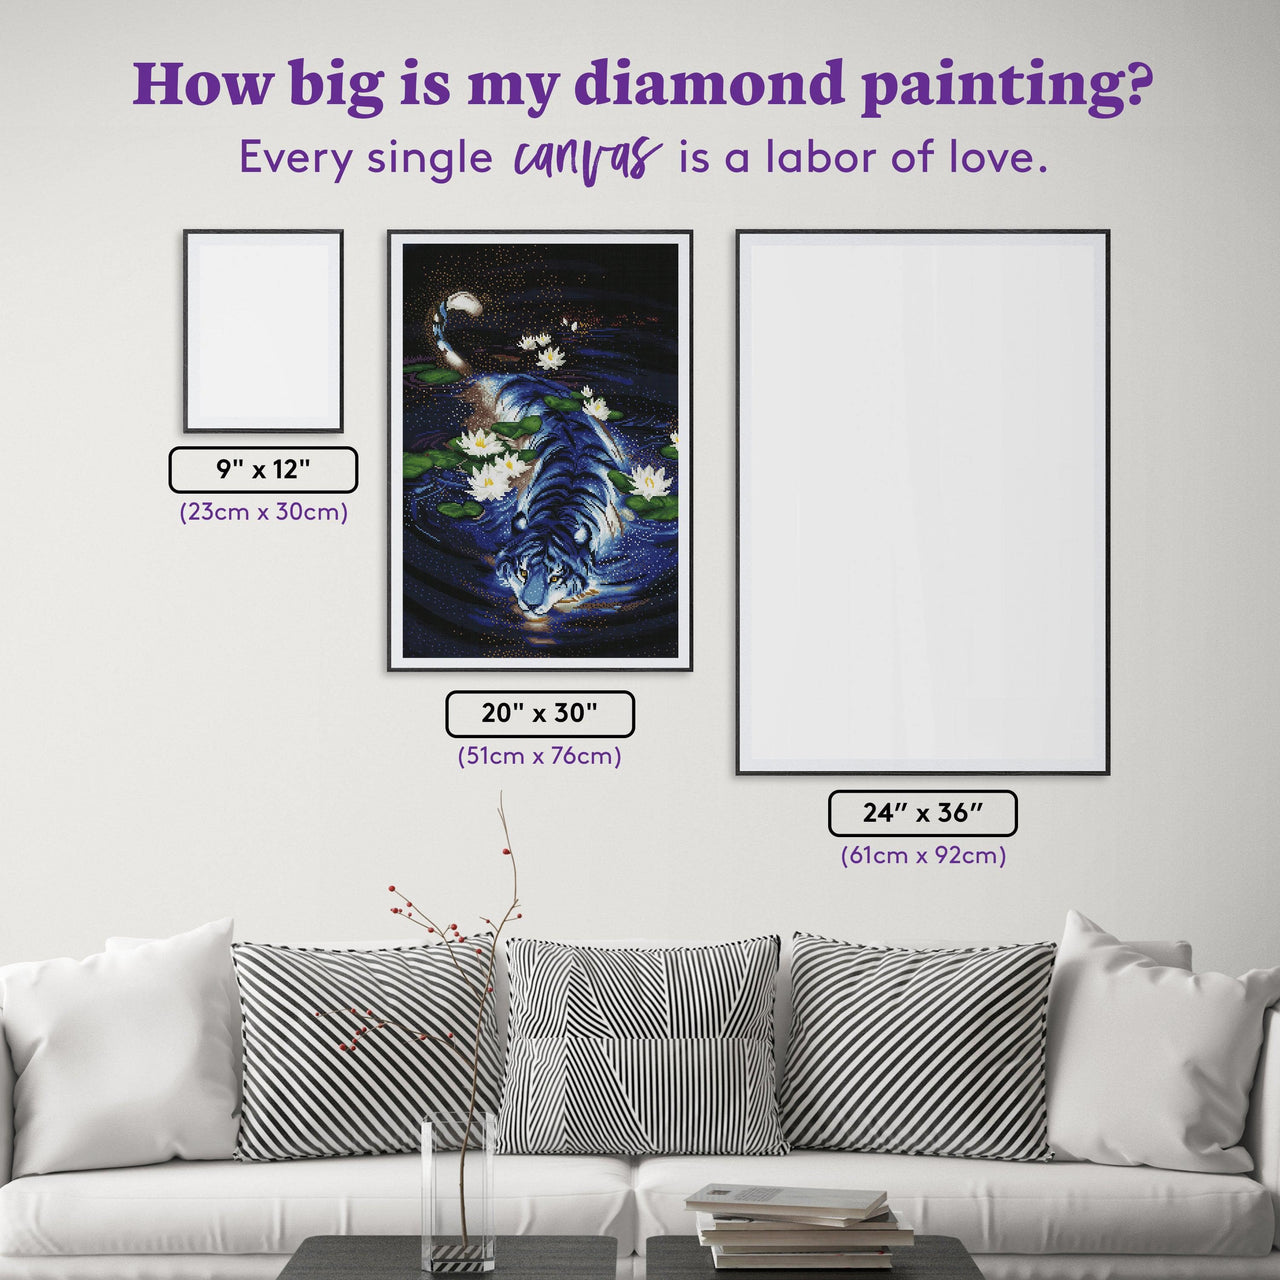 Diamond Painting Star Maker 20" x 30″ (51cm x 76cm) / Square with 33 Colors including 2 ABs / 60,702